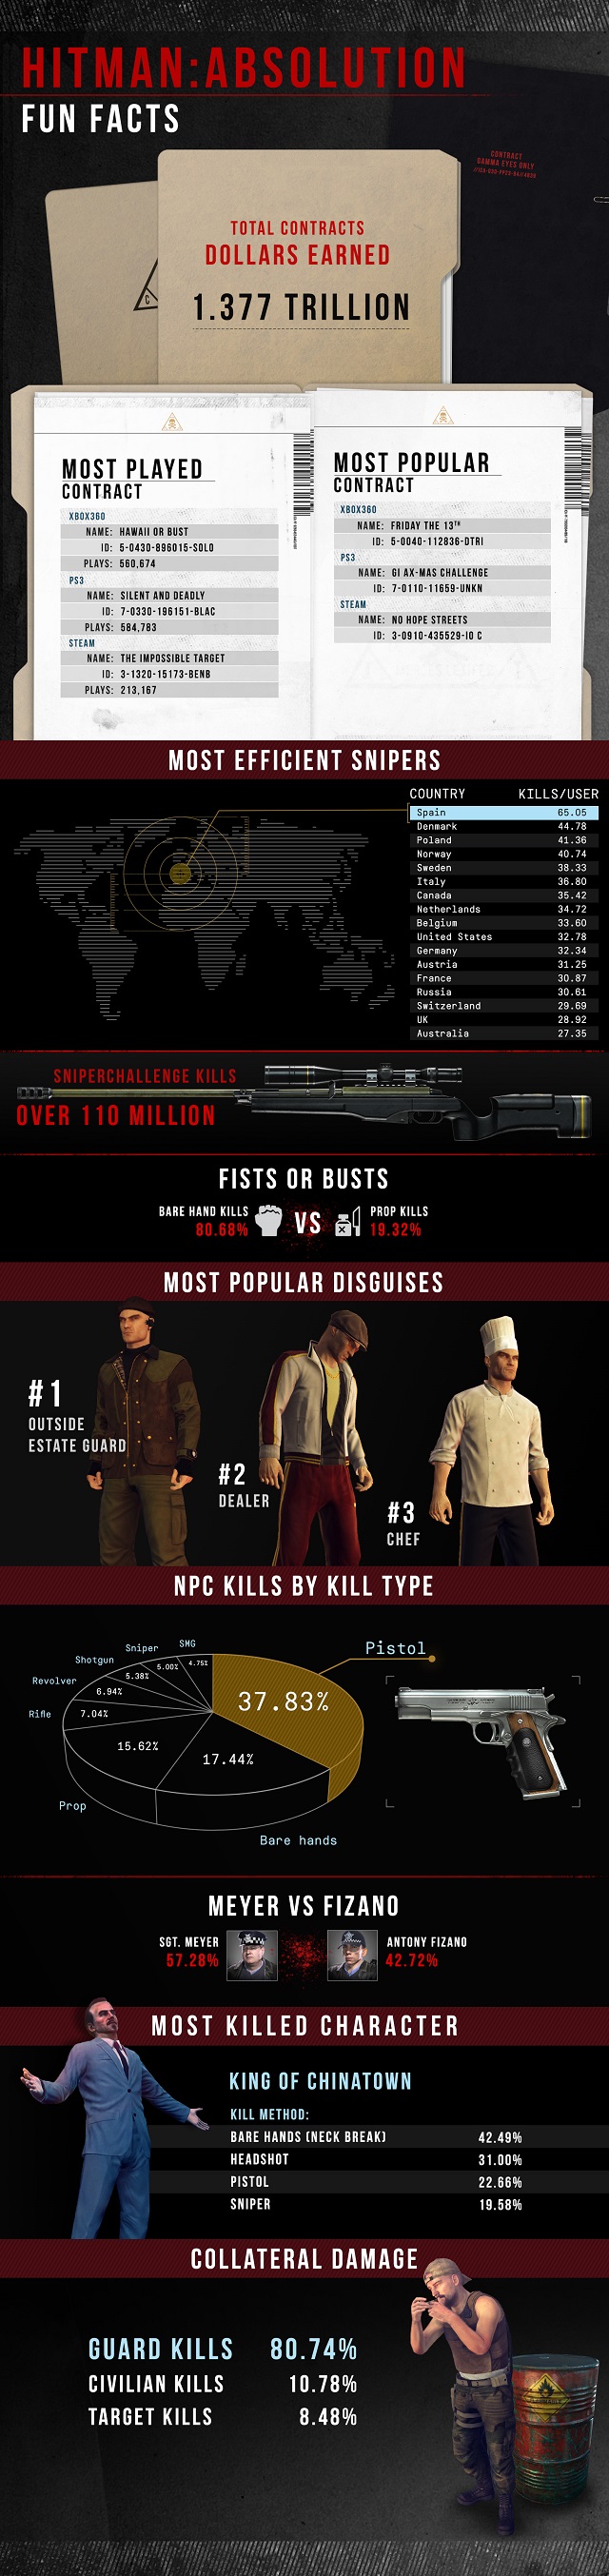 Hitman-Absolution-infographic